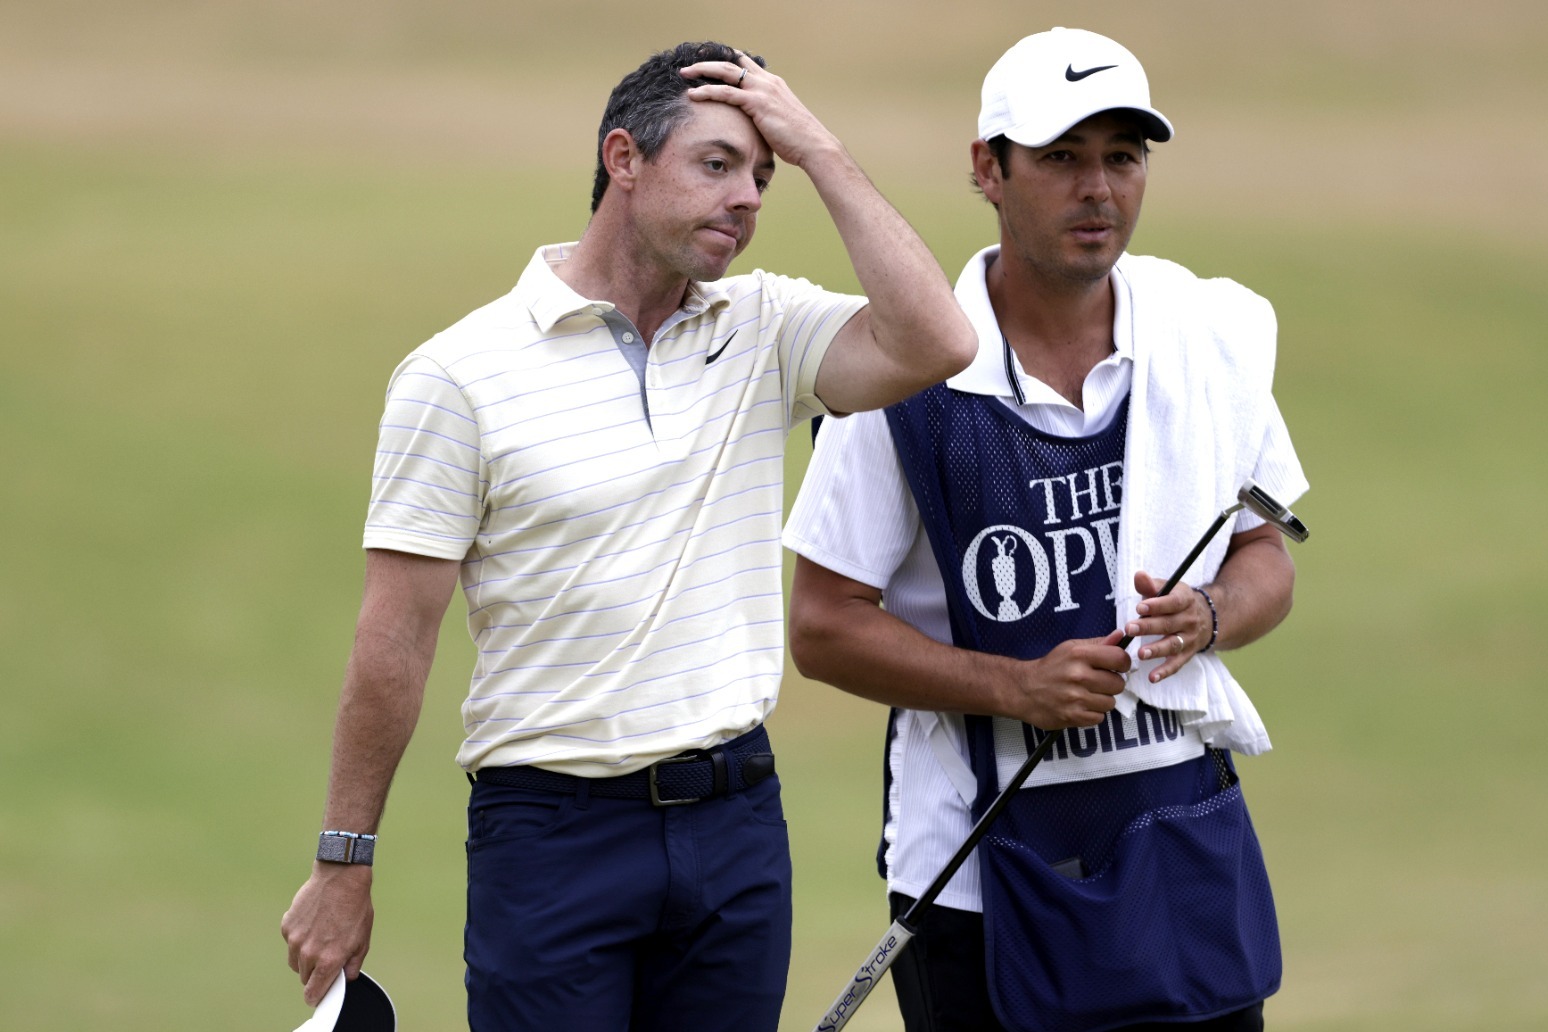 Rory McIlroy determined to finish season strongly after Open disappointment 